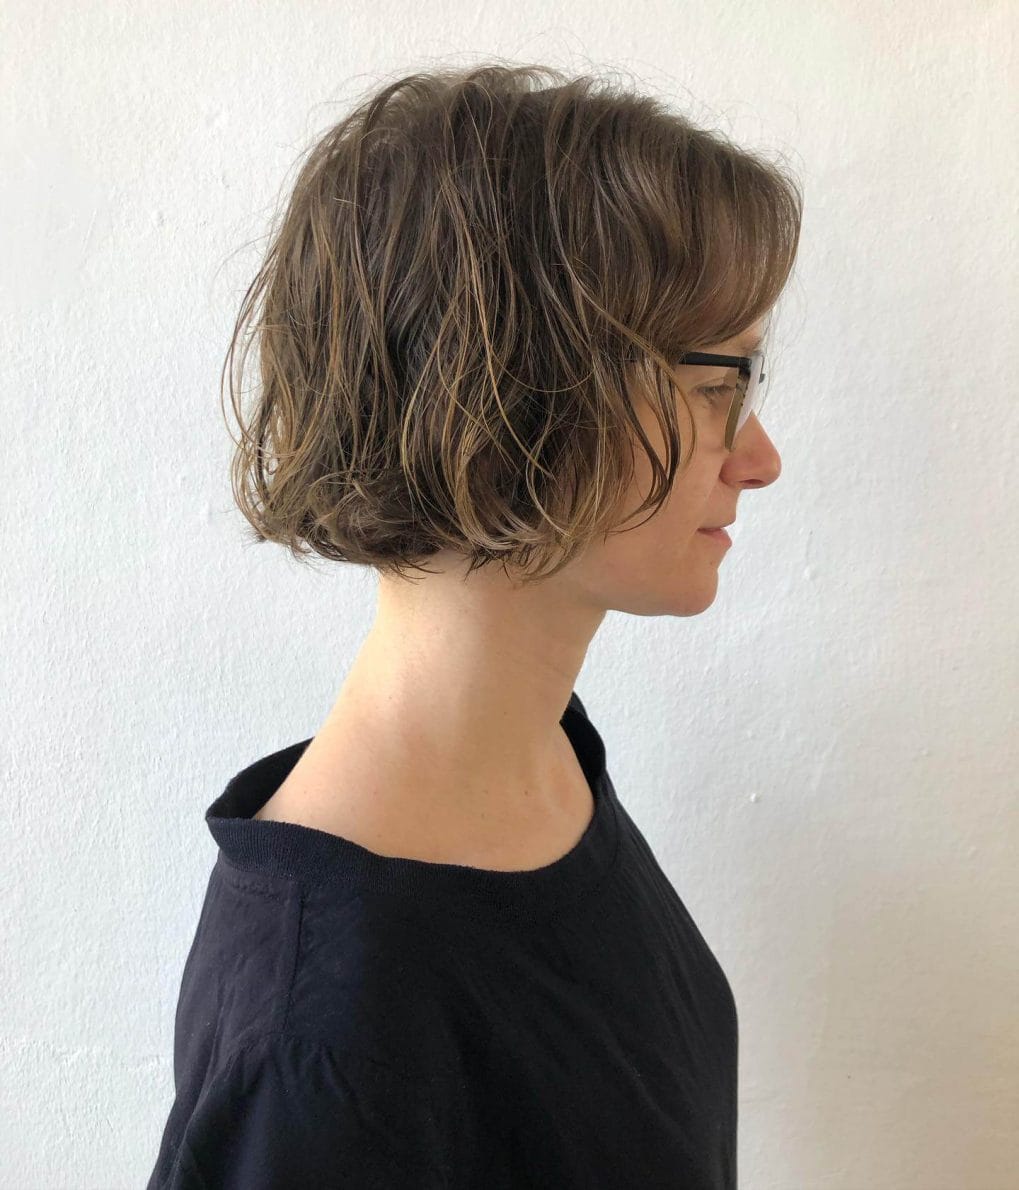 Beautifully tousled layered bob with soft gentle waves.